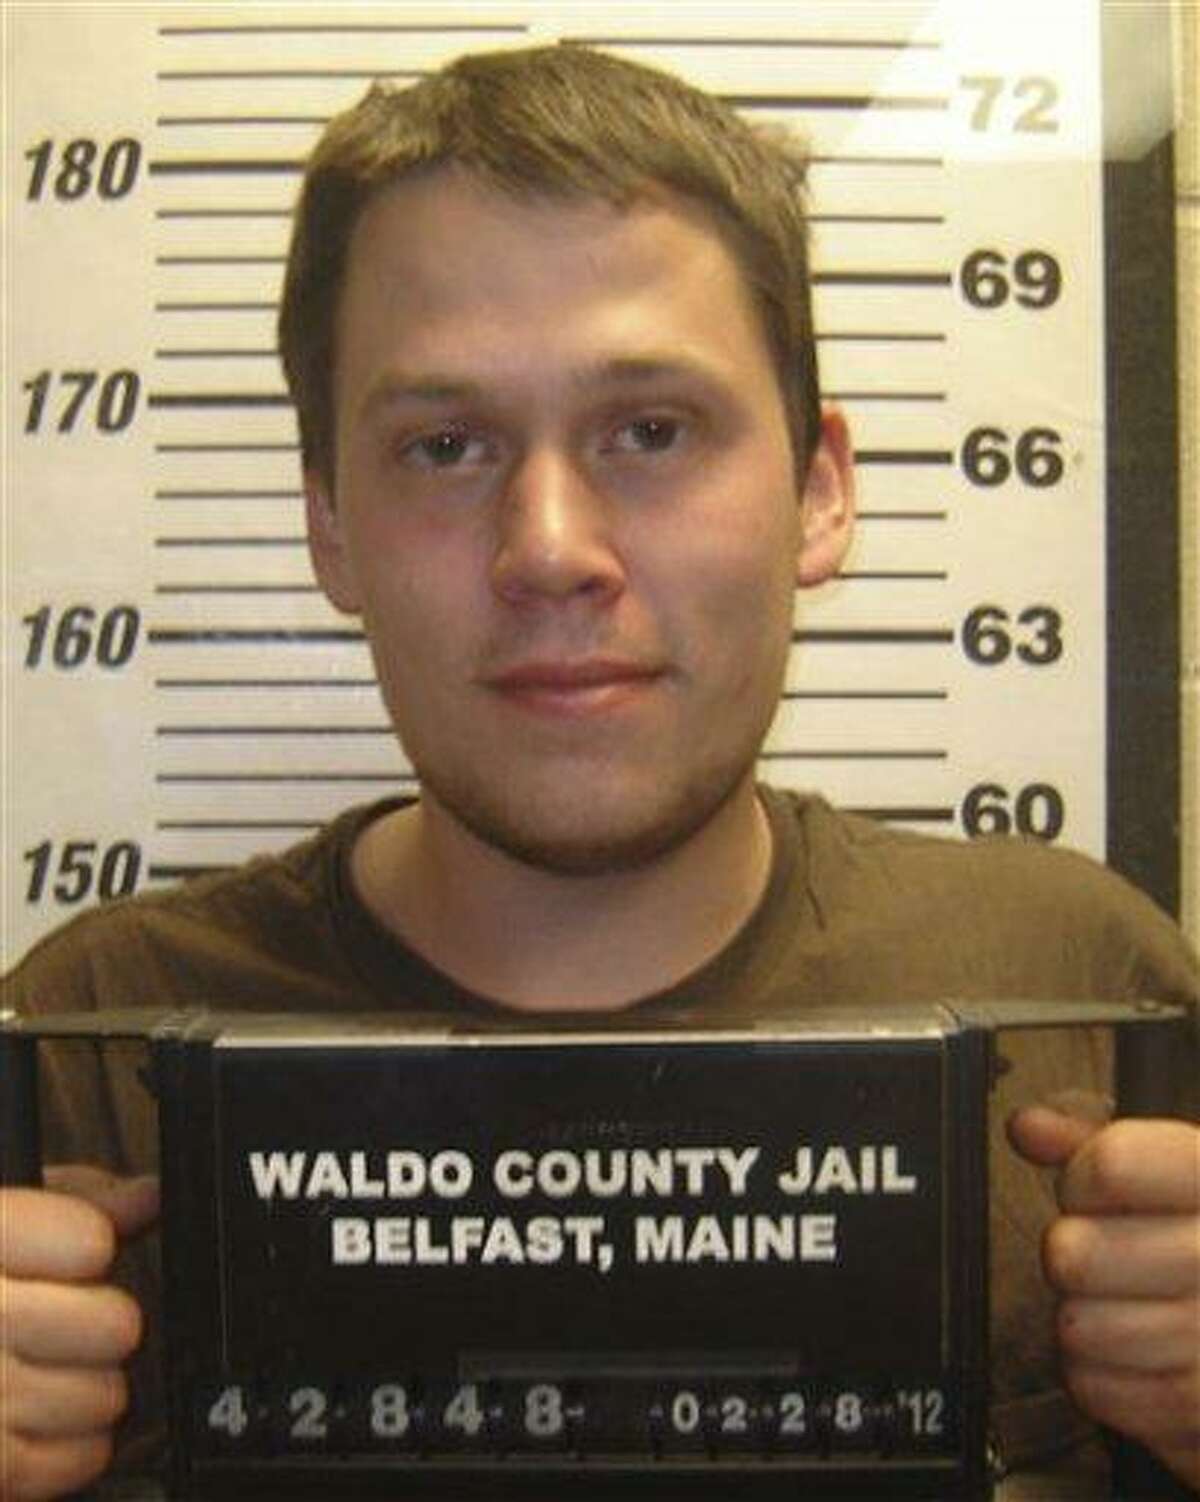 Maine police say they charged 24-year-old Daniel Porter, pictured here at the Waldo County Jail, in the death of Jerry Perdomo of Seminole County, Florida, who had been missing since Feb. 16. Associated Press